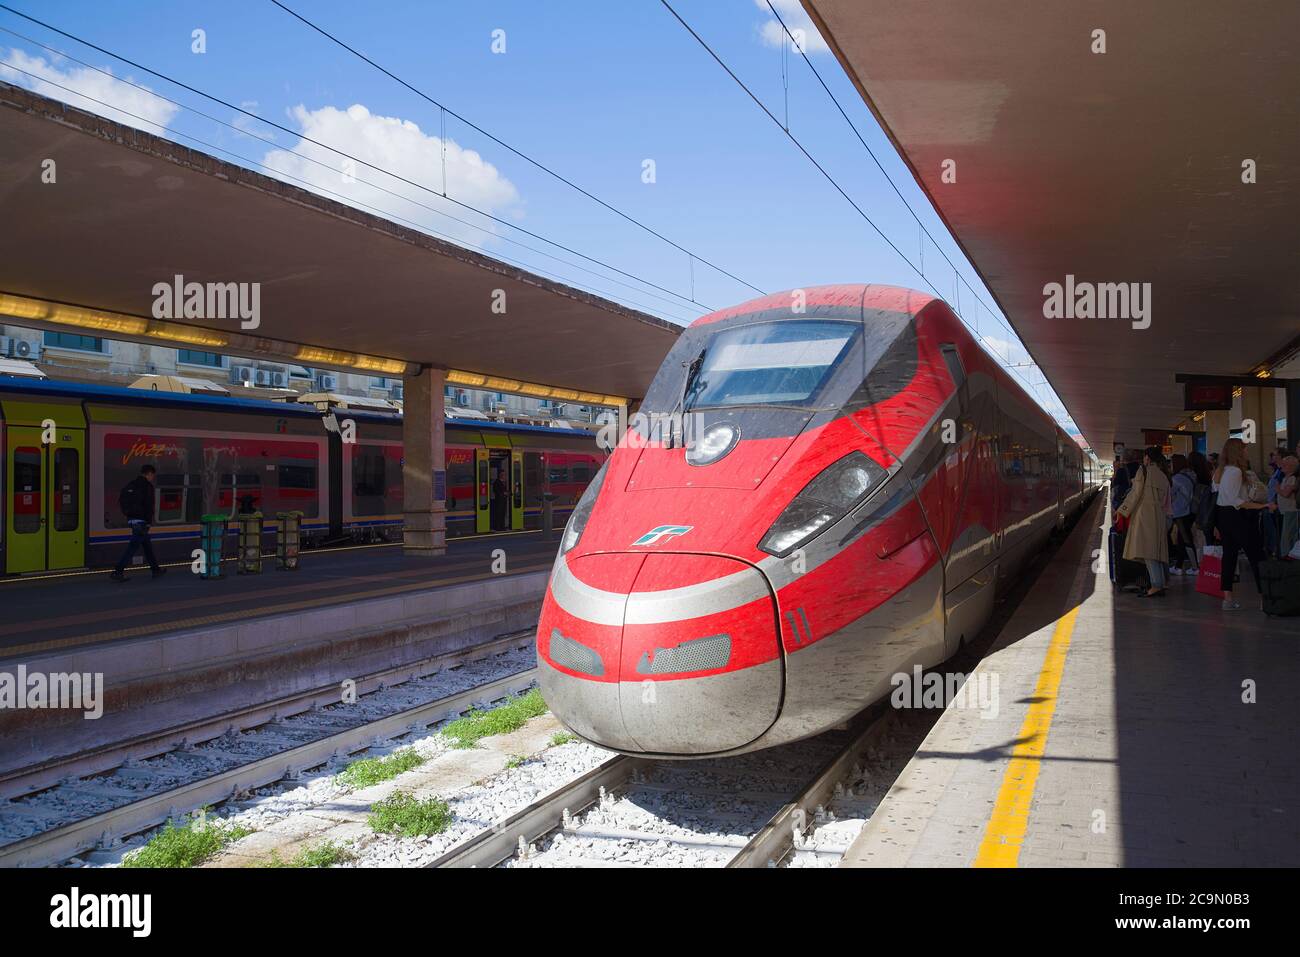 FLORENCE, ITALY - SEPTEMBER 25, 2017: The high-speed passenger train Frecciarossa ETR.1000 of the Trenitaliya company has arrived to the central railw Stock Photo